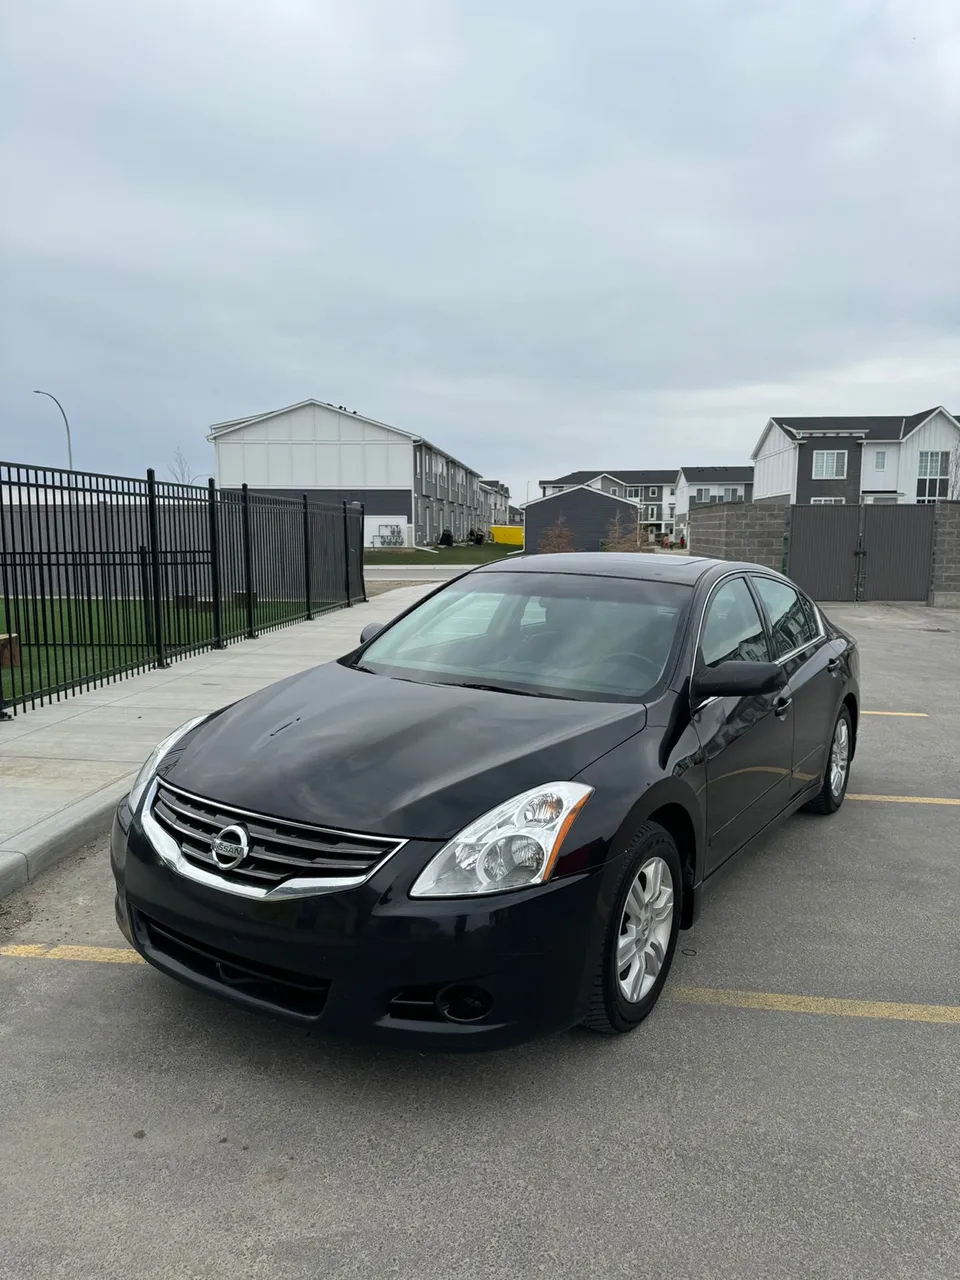 2011 Nissan Altima - Great Condition